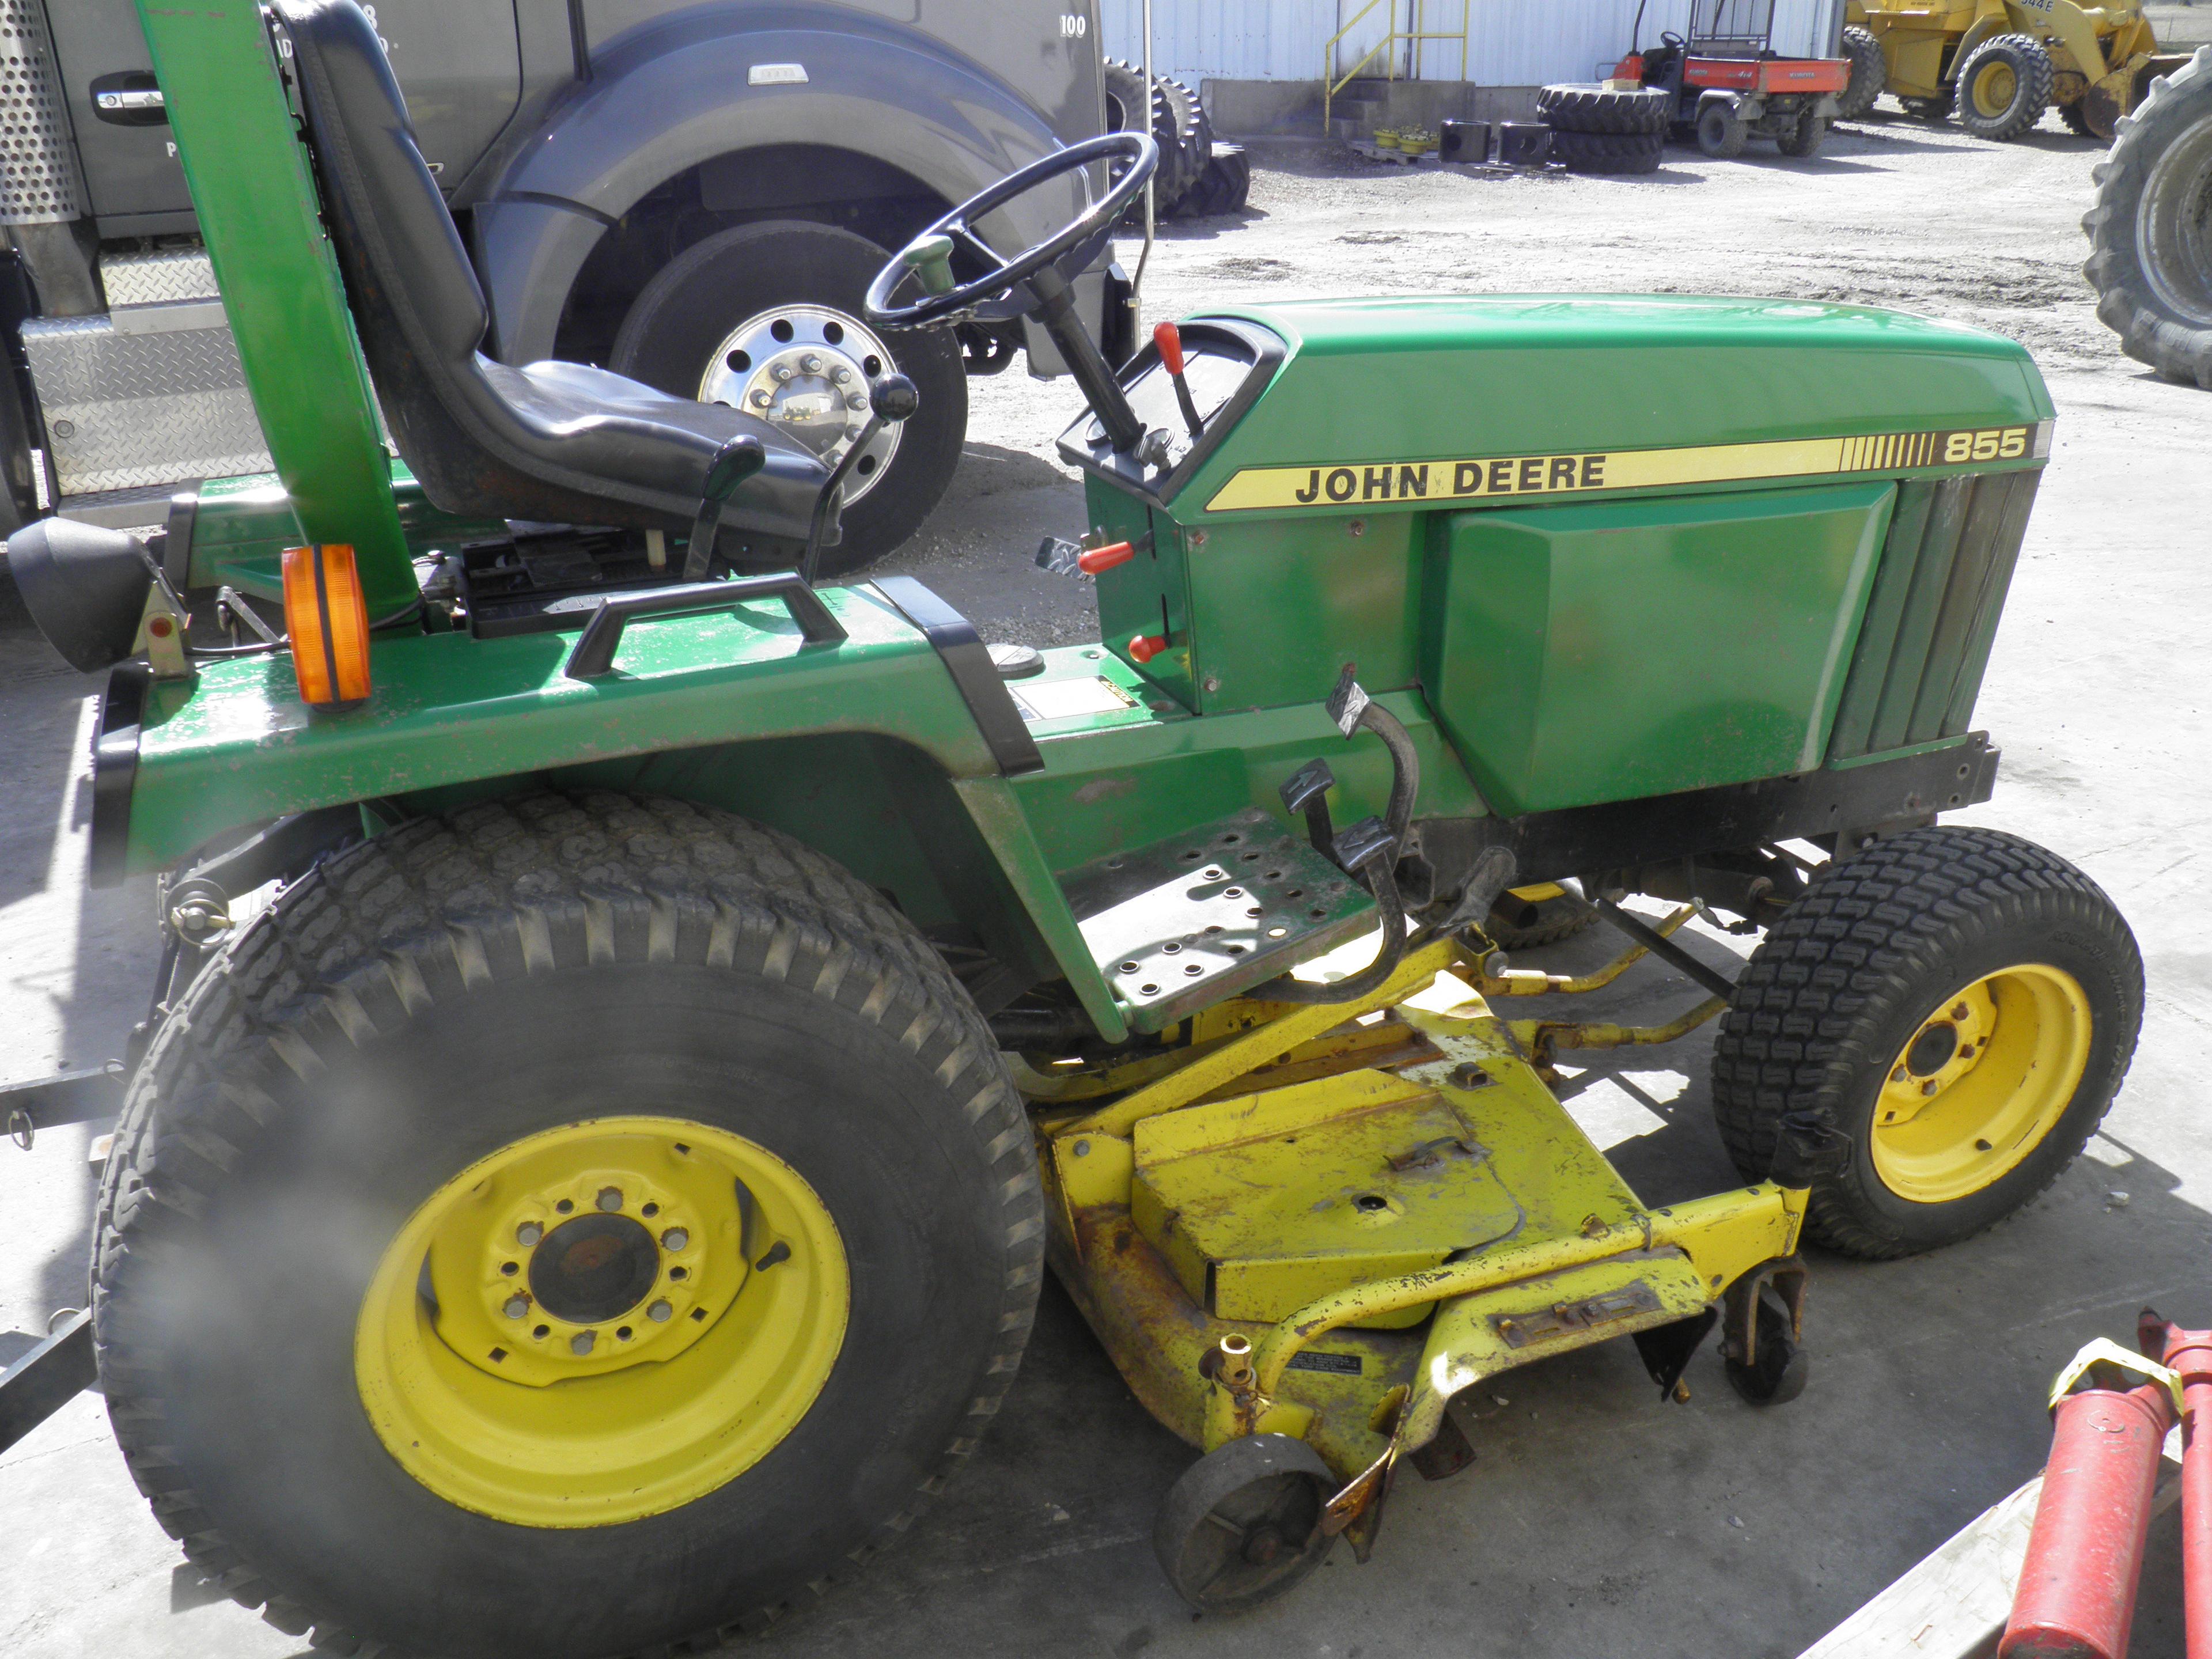 87 JD 855 Compact utility, 3-point, 60" deck, PTO, hydrostatic, FWD,